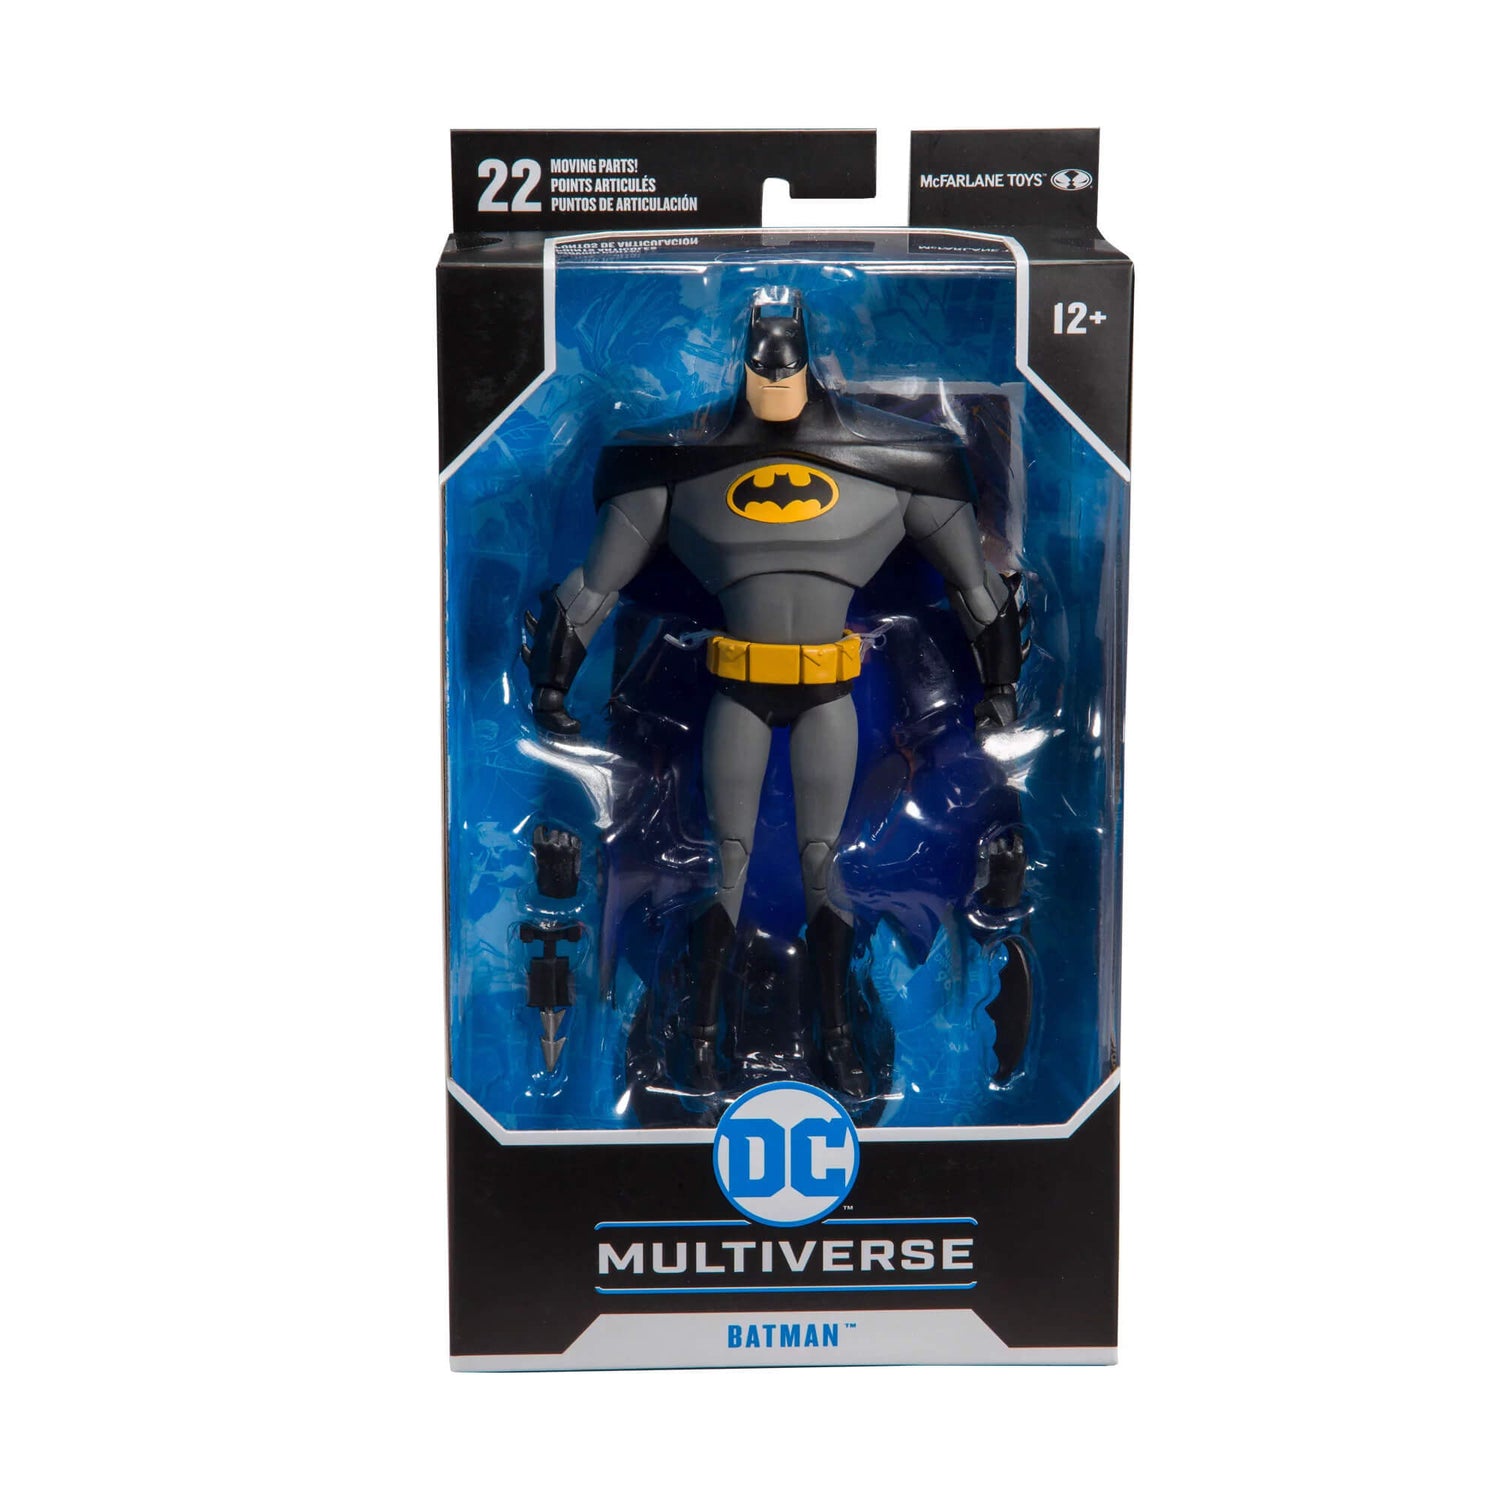 McFarlane Toys DC Multiverse 7" Batman The Animated Series action figure in packaging